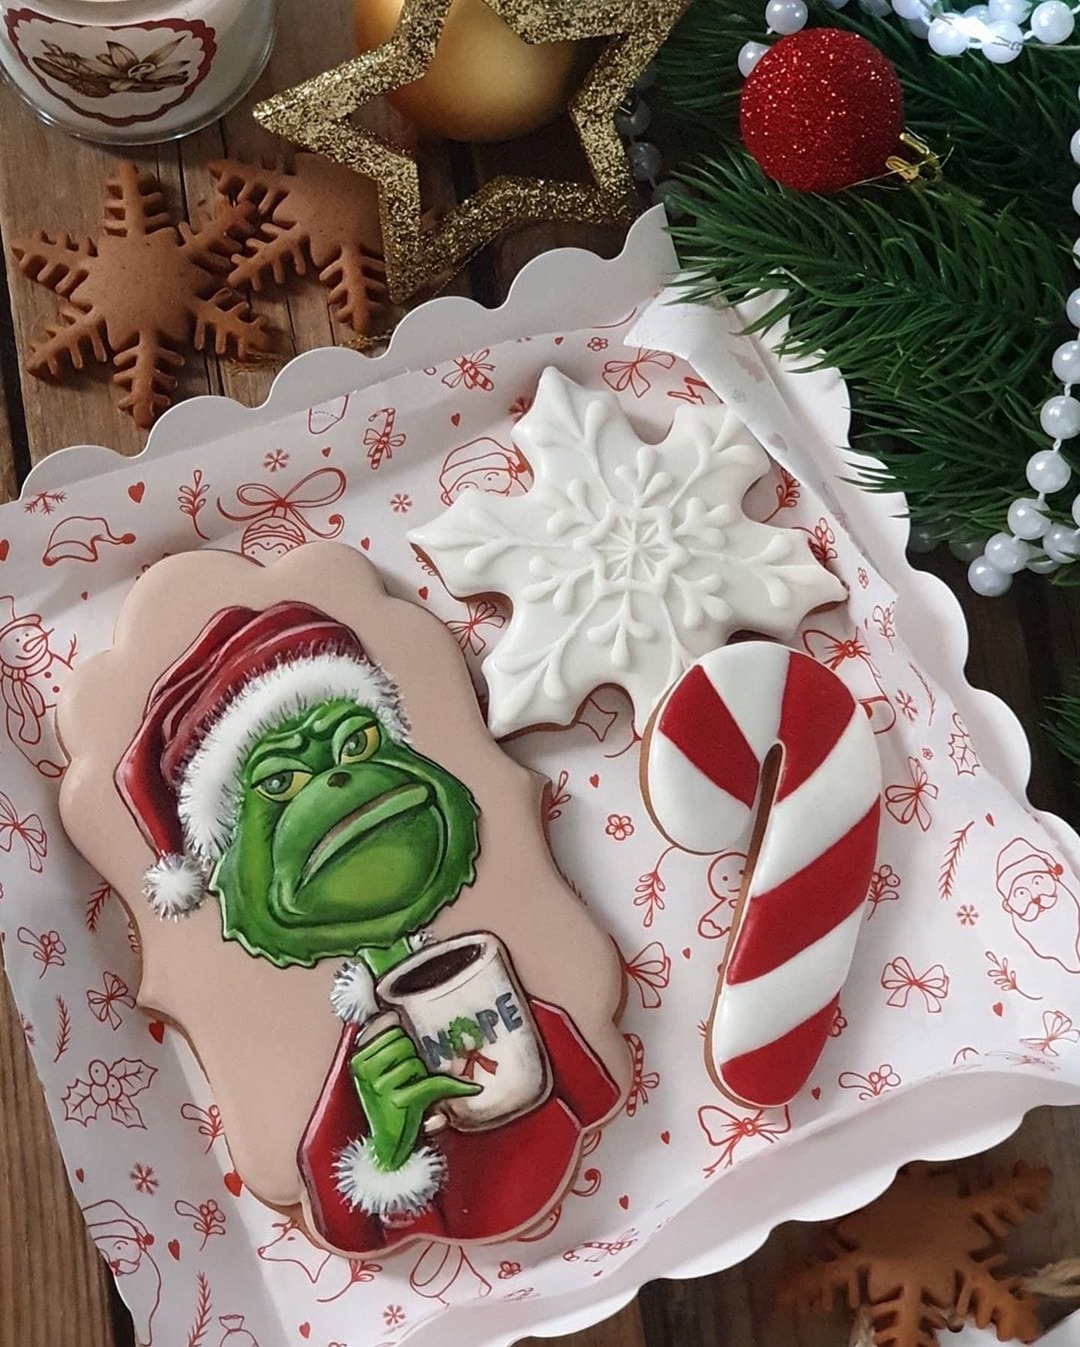 Grinch Who Stole Christmas Cookie Box